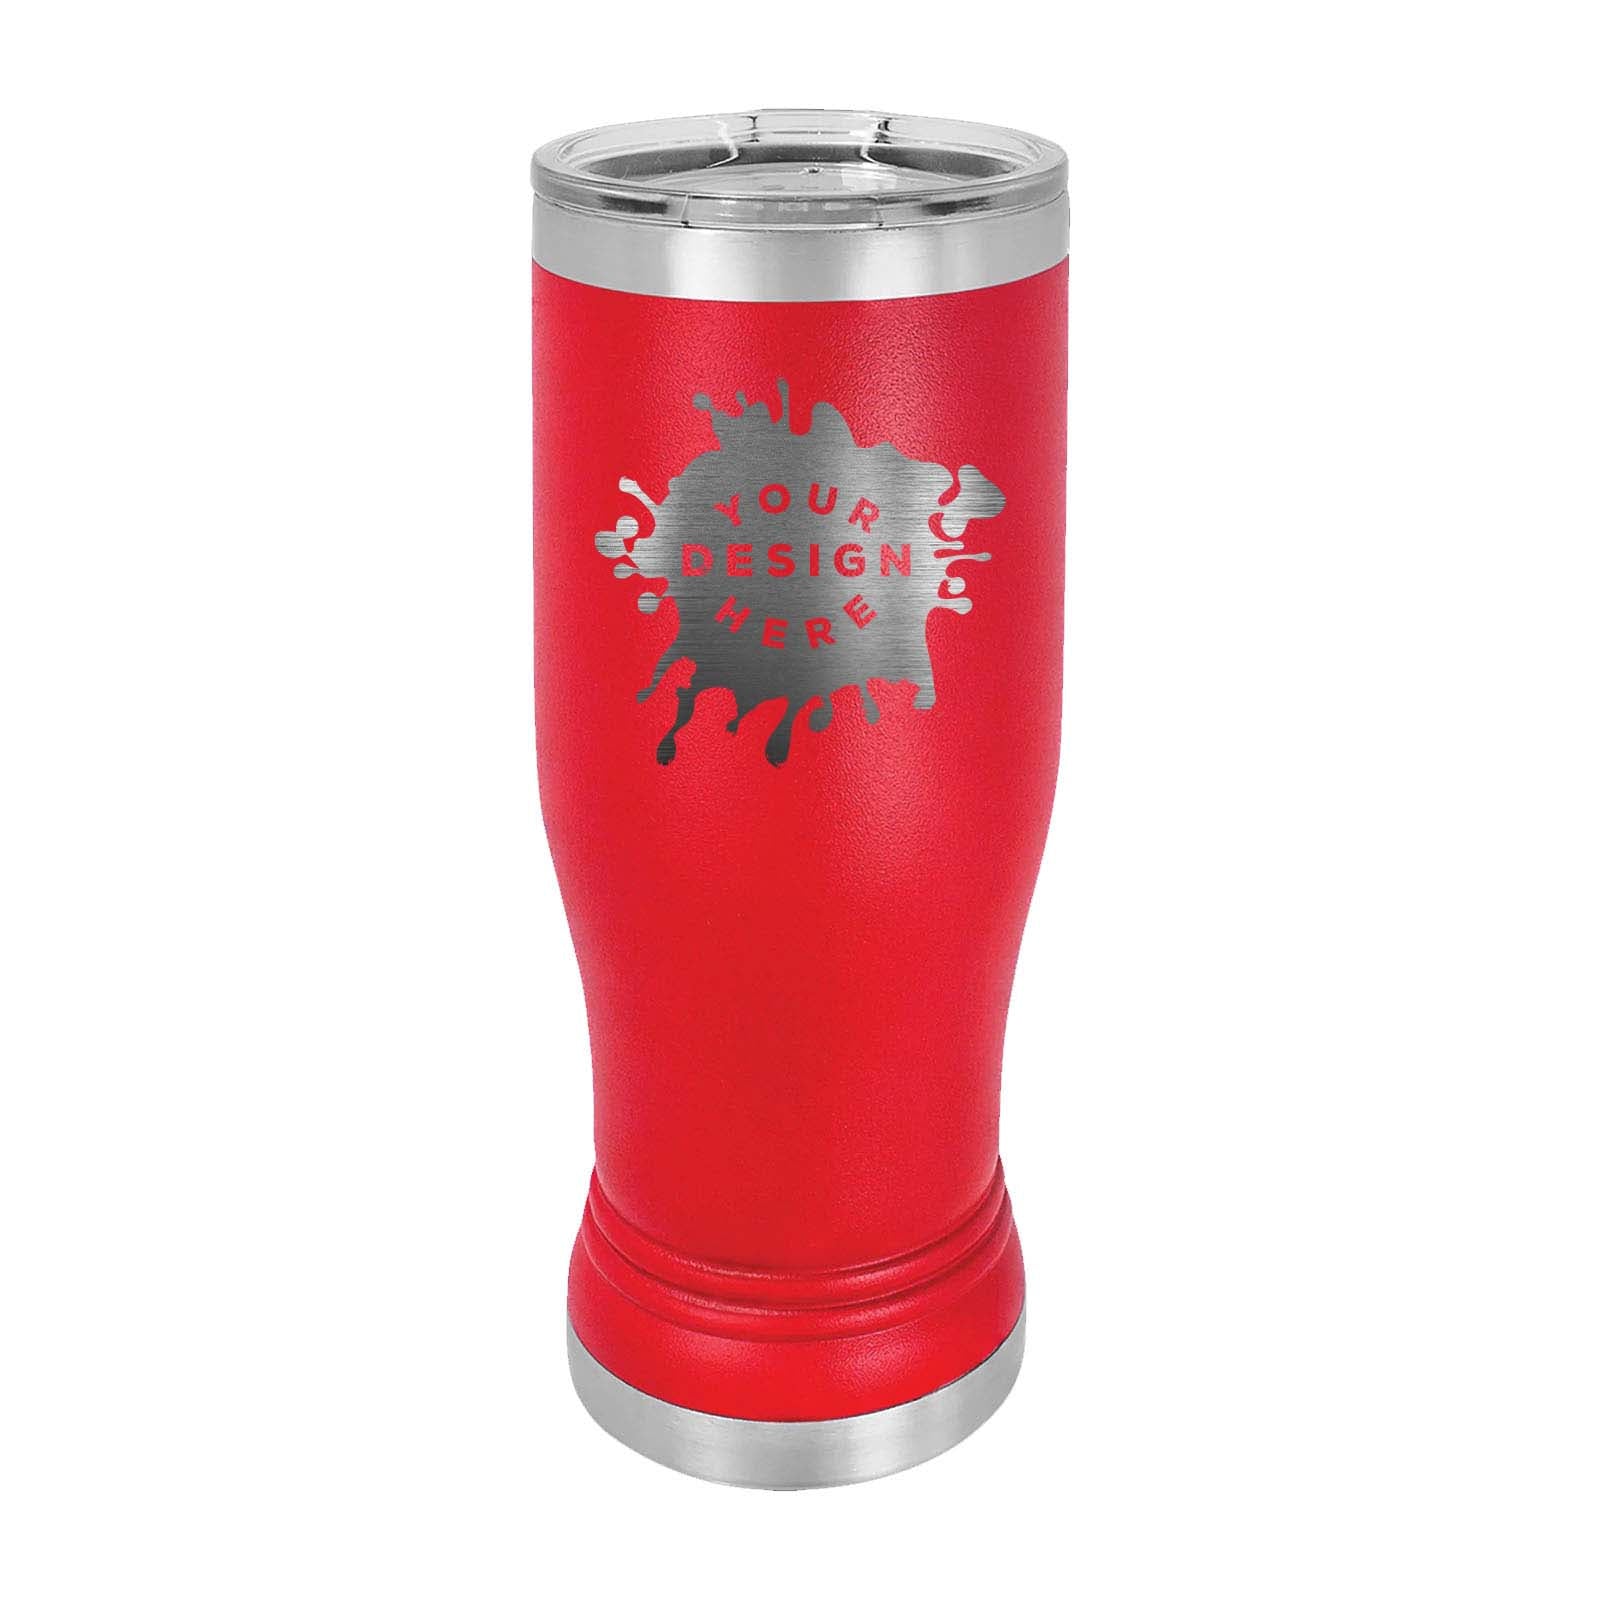 REAL YETI 14 Oz. Laser Engraved Rescue Red Stainless Steel Yeti